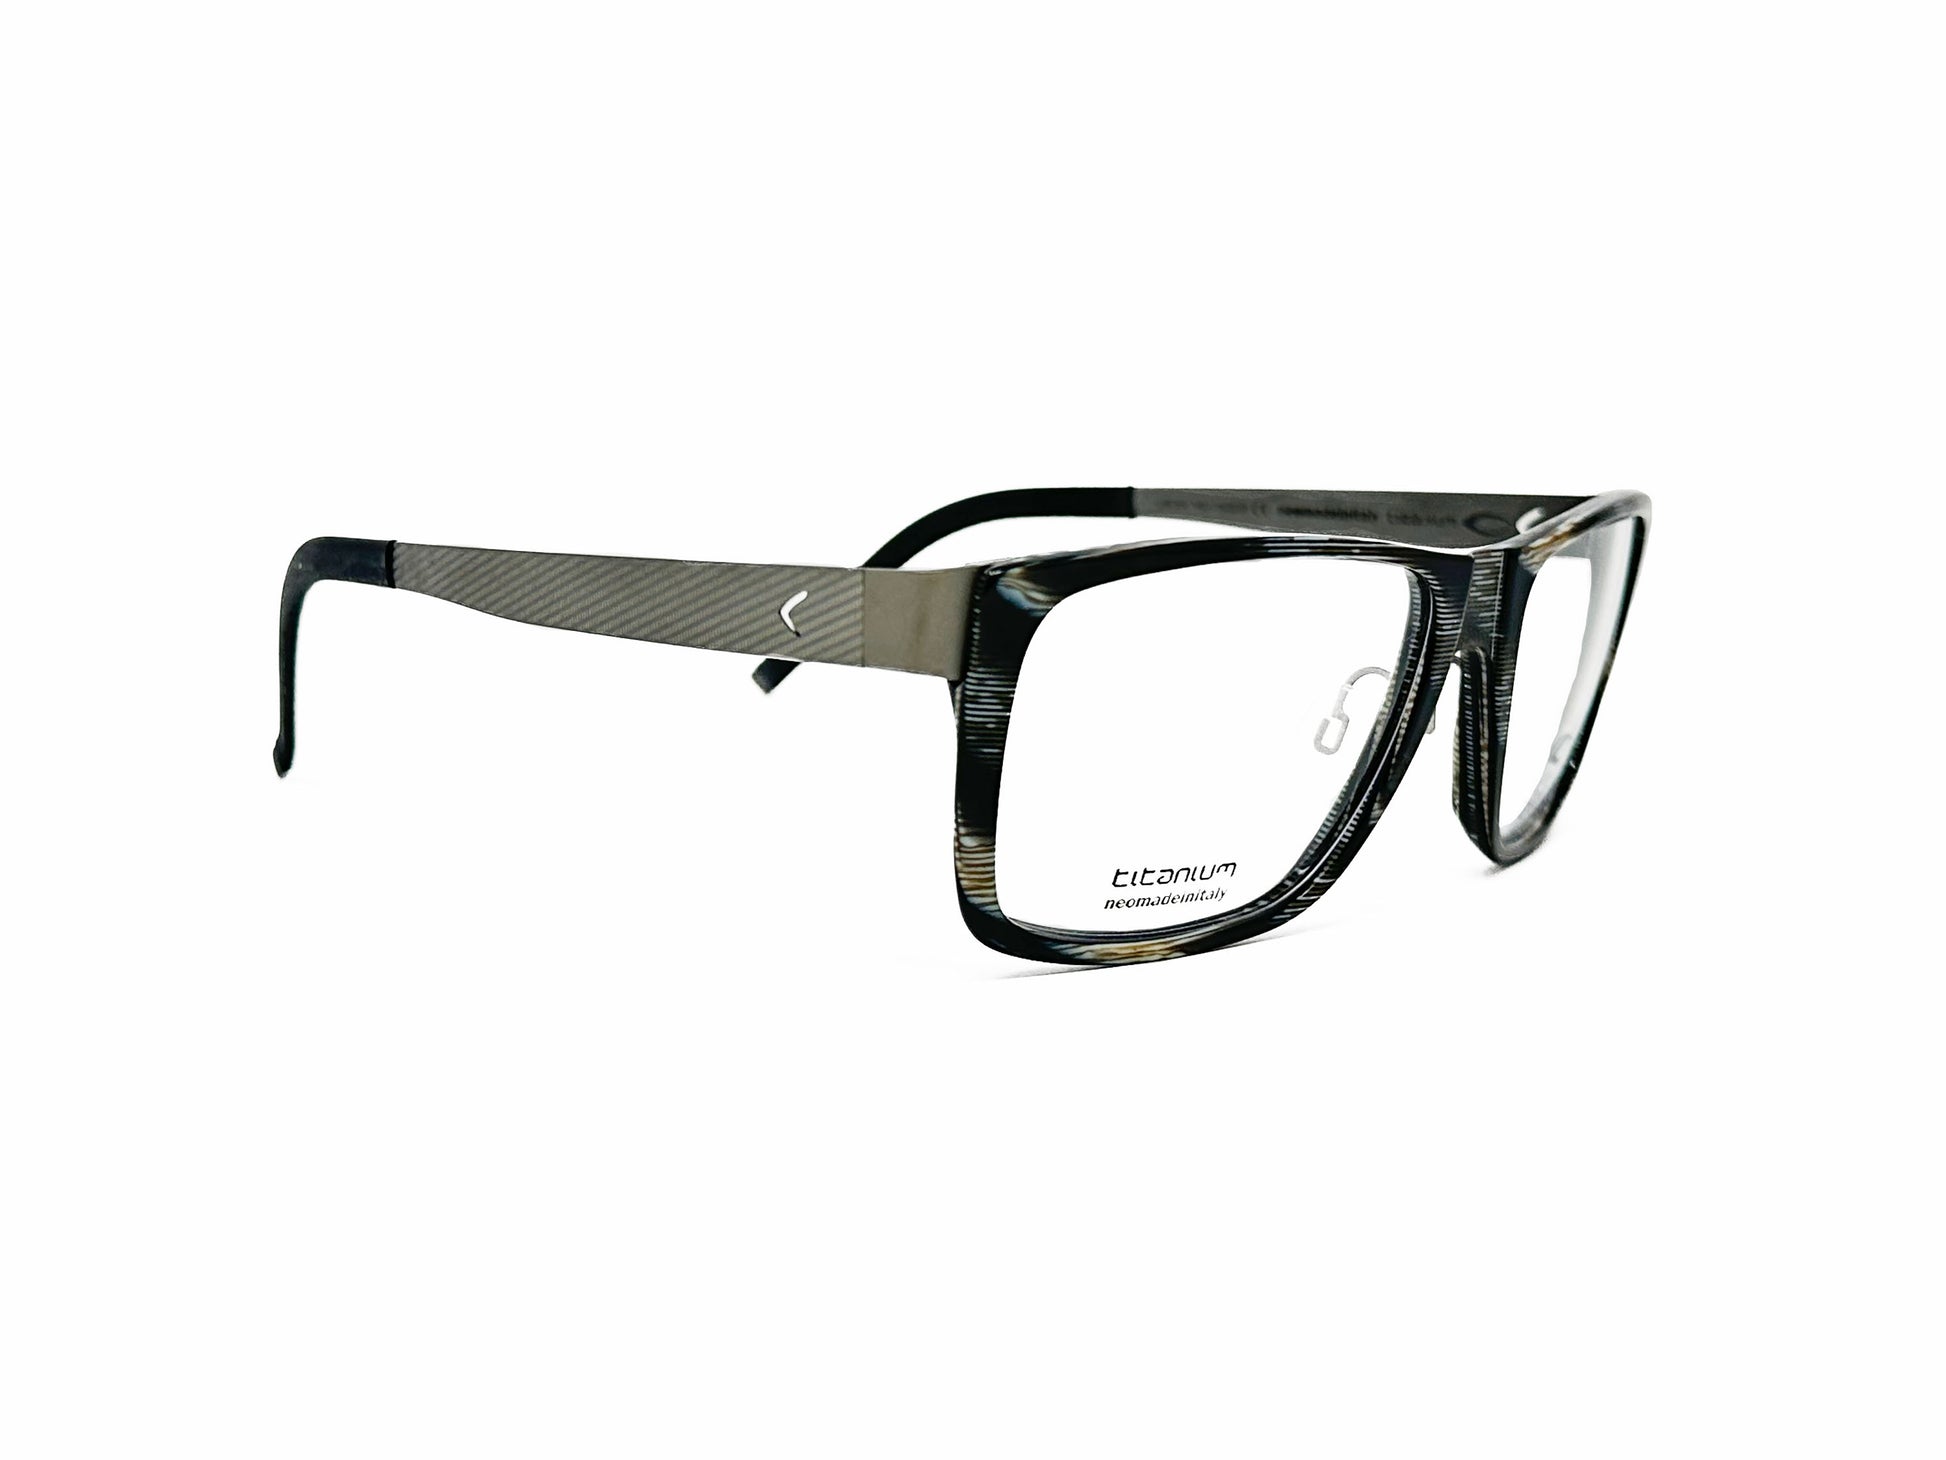 Blackfin acetate optical frame. Model: BF626 Burray. Color: 233 Grey and black with stripes. Side view.